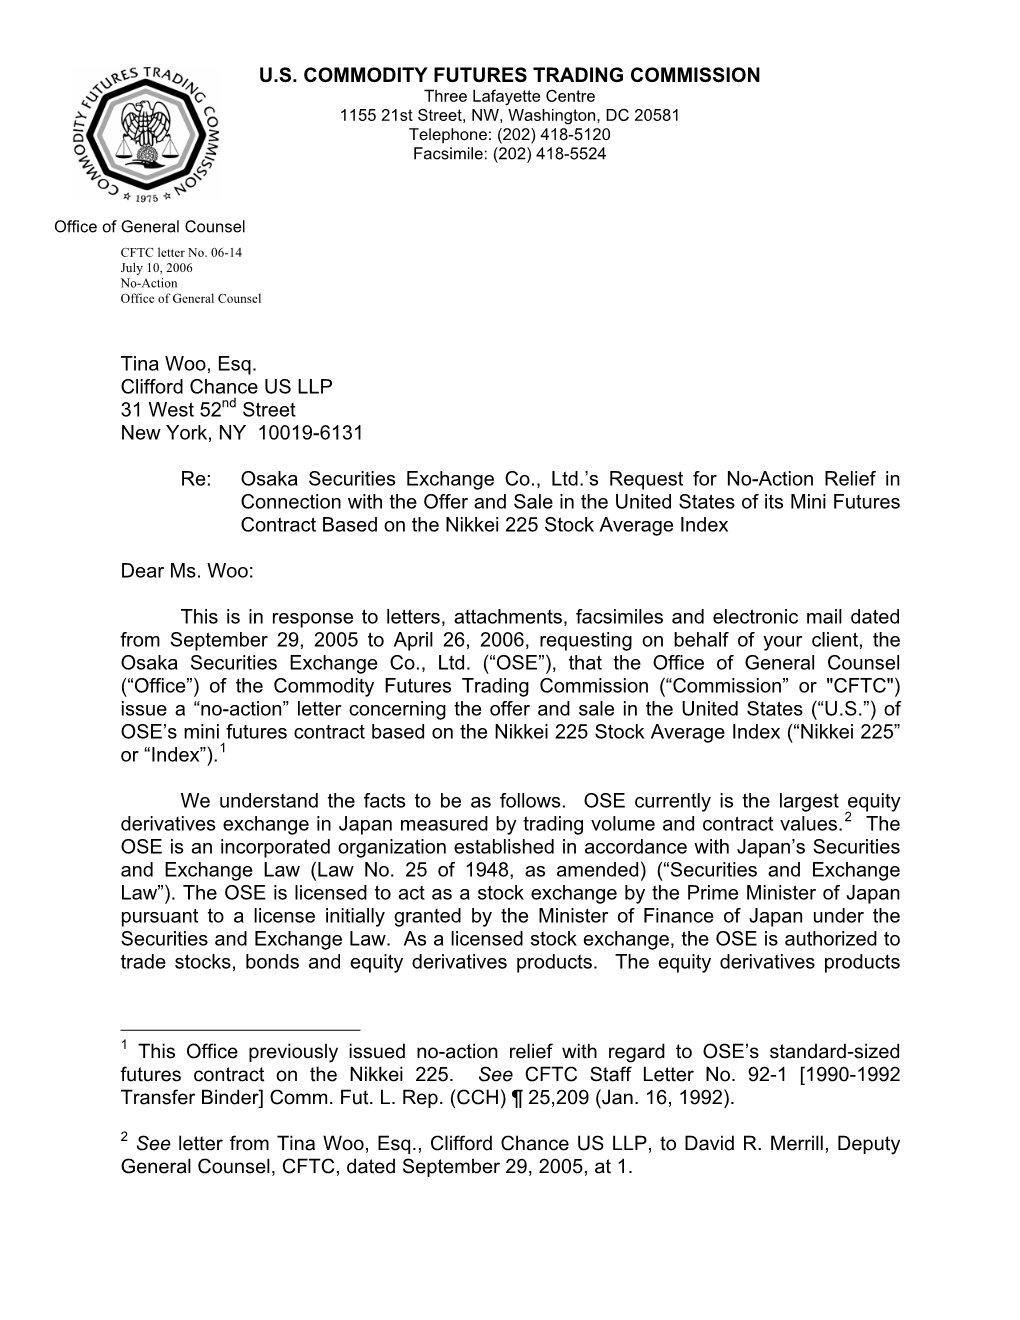 CFTC Letter No. 06-14 July 10, 2006 No-Action Office of General Counsel